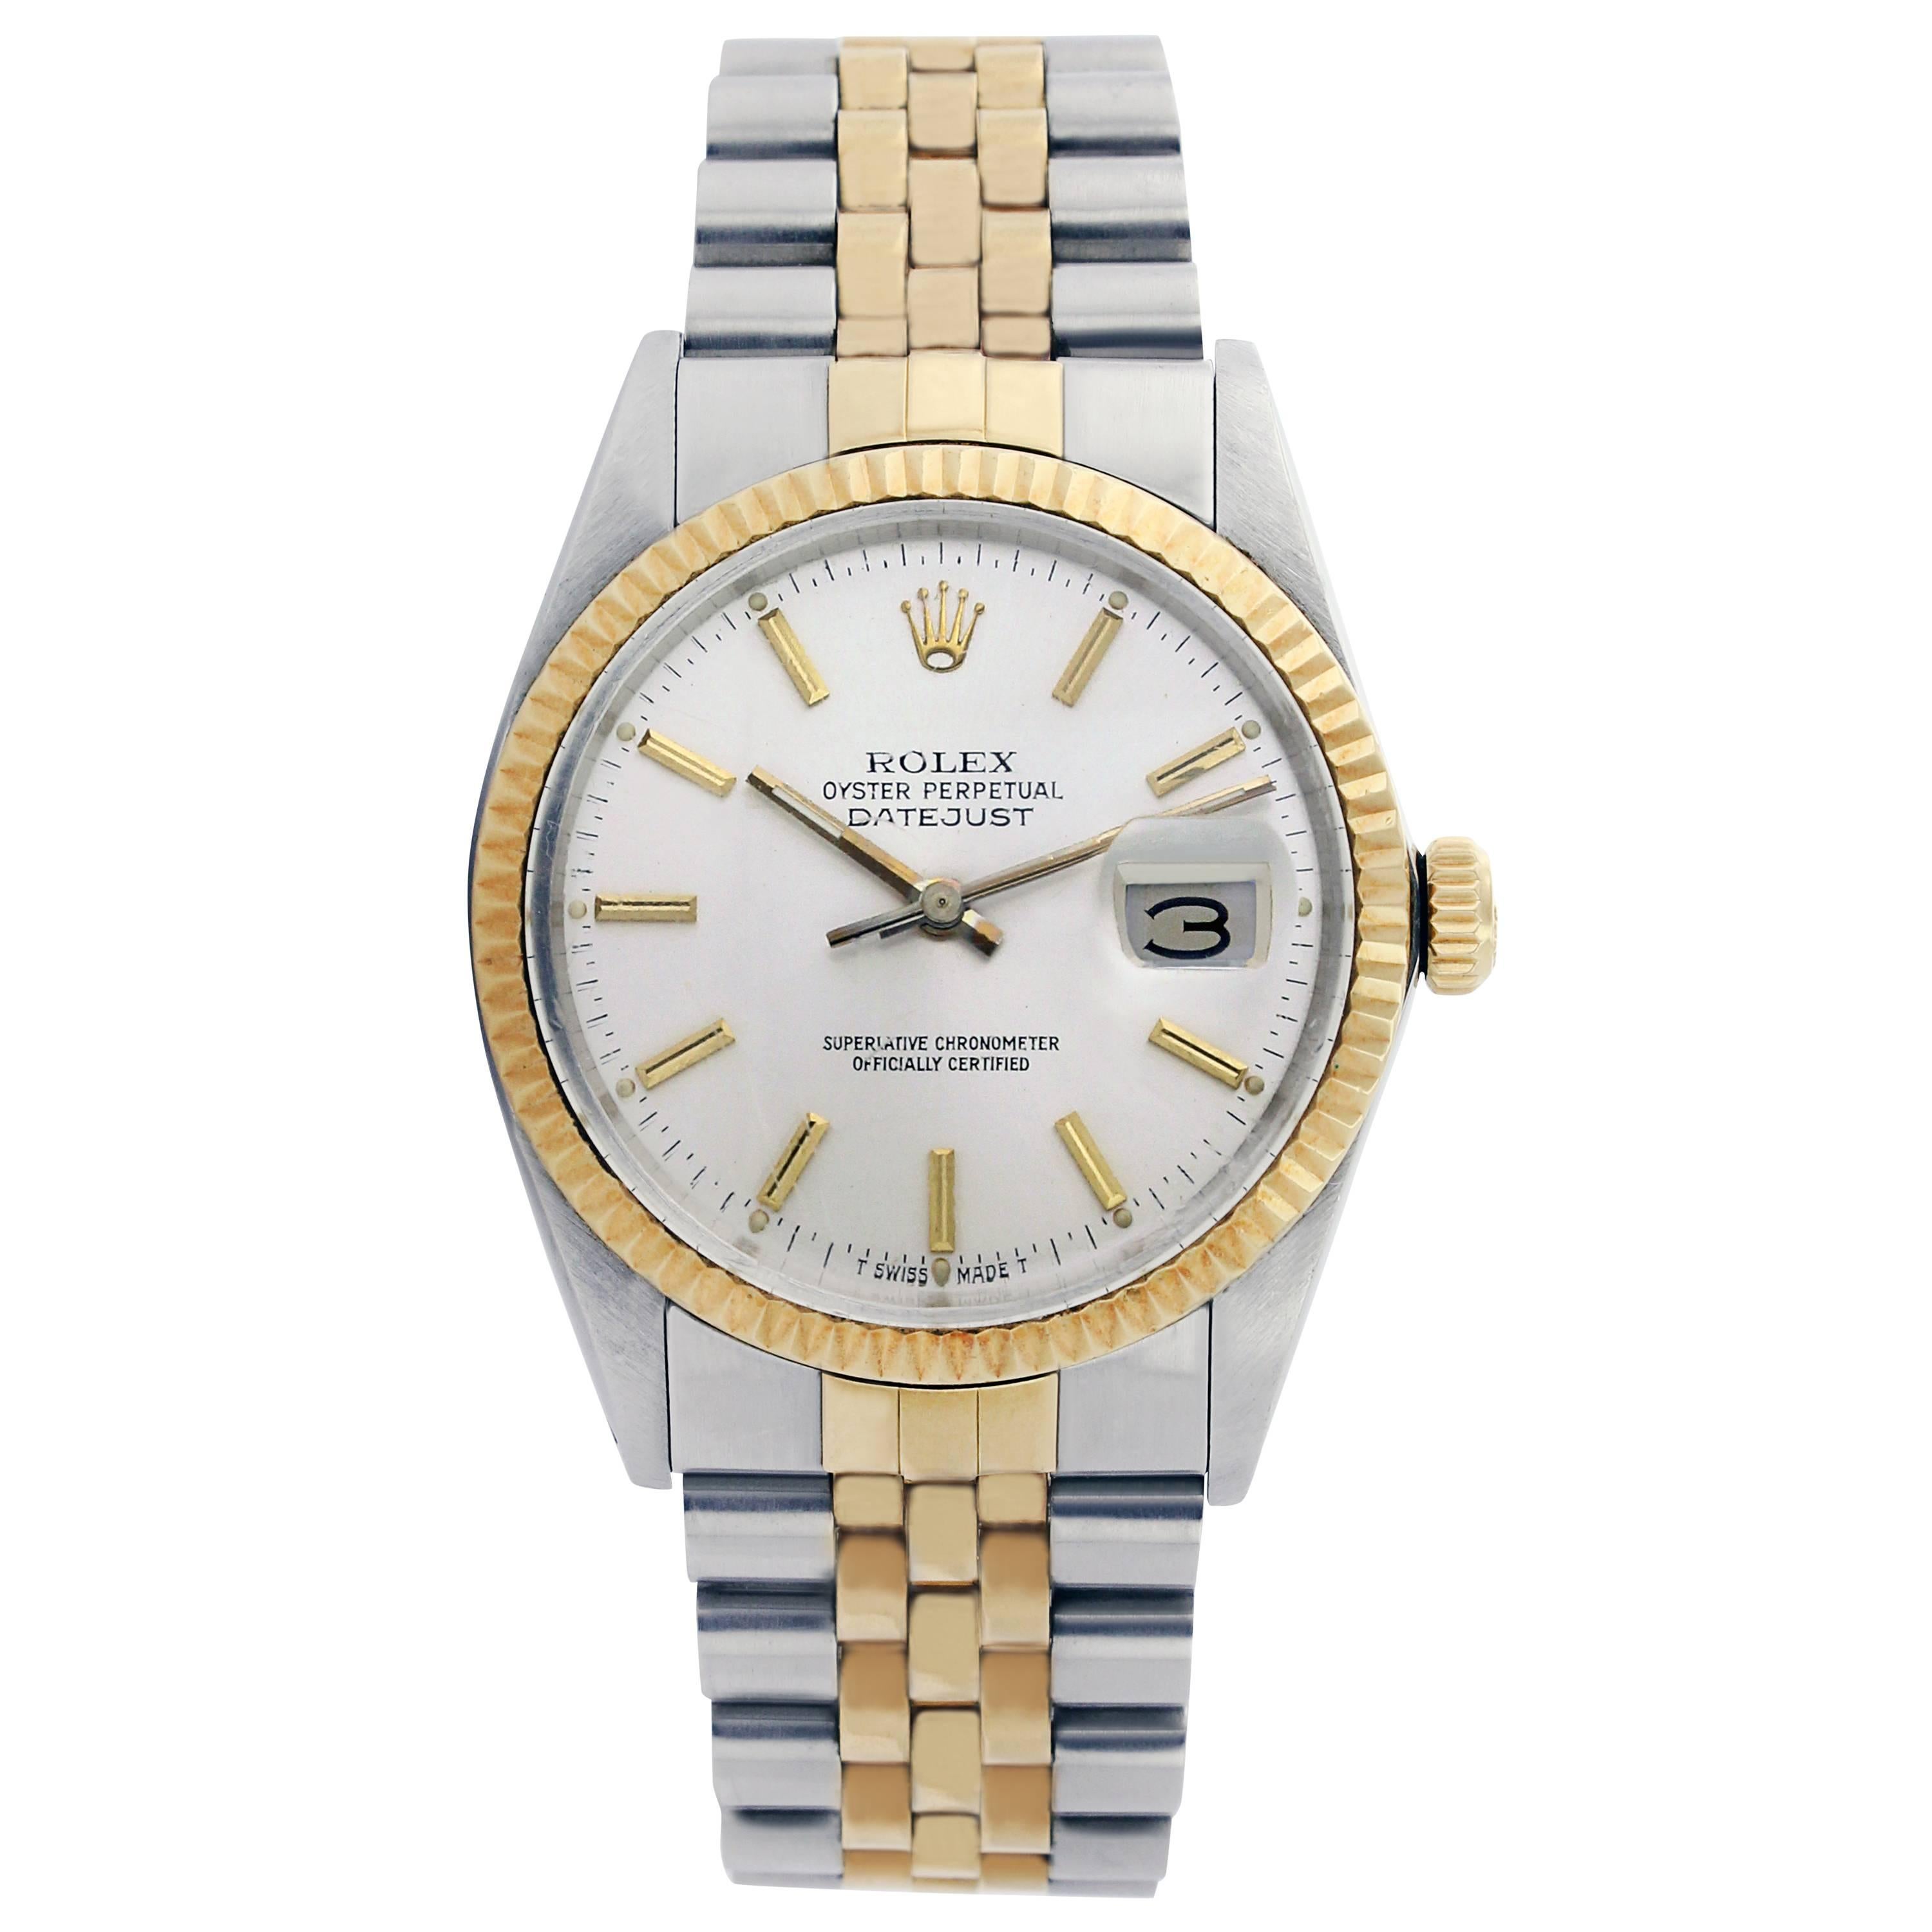 Rolex yellow gold Stainless Steel Datejust Automatic Wristwatch Ref 16013 For Sale